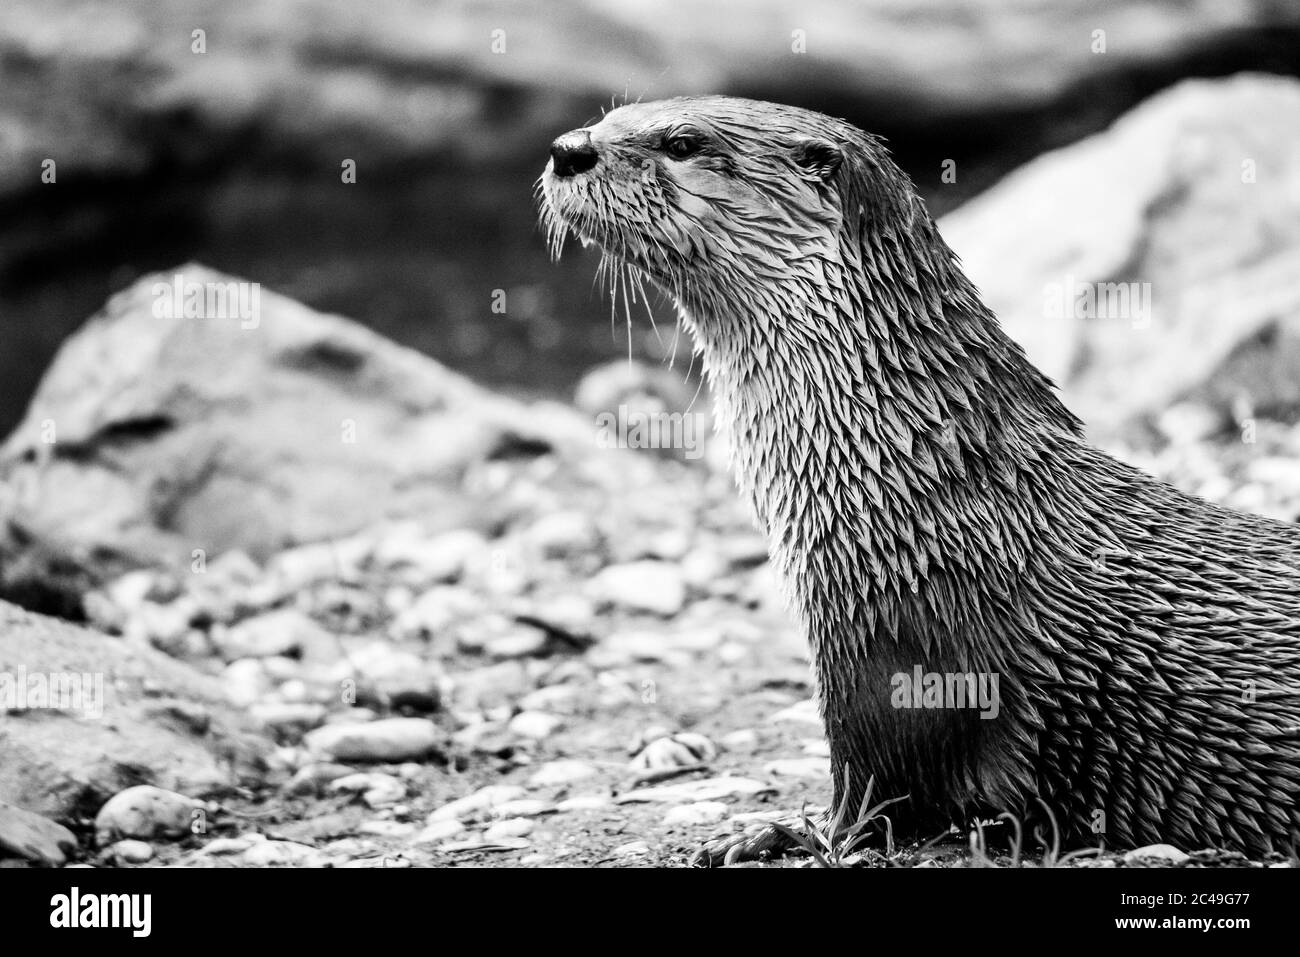 Wet otter sitting on the river bank. Black and white image. Stock Photo